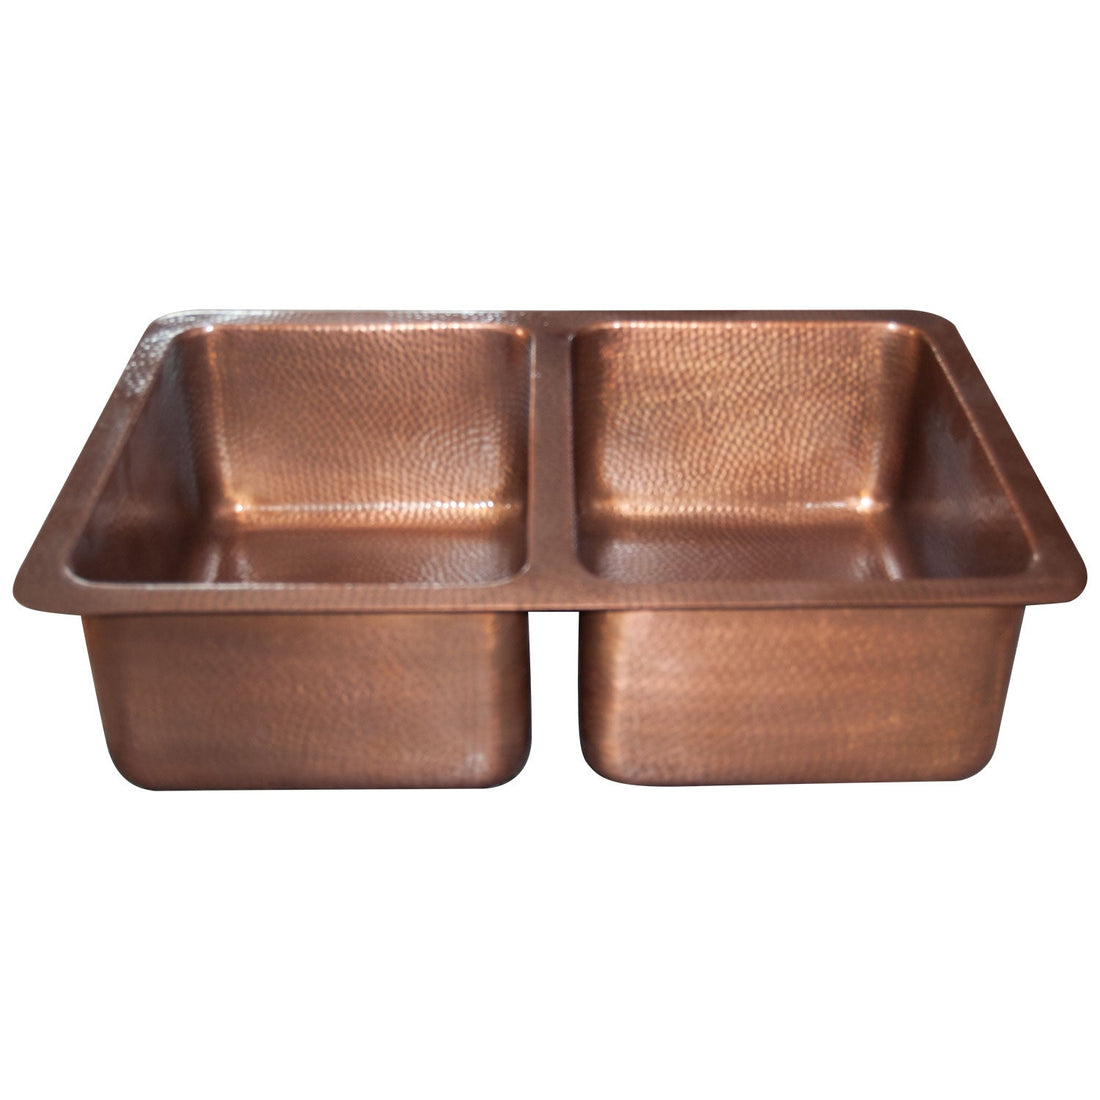 Double Bowl Copper Kitchen Sink Hammered Single Wall Antique Finish